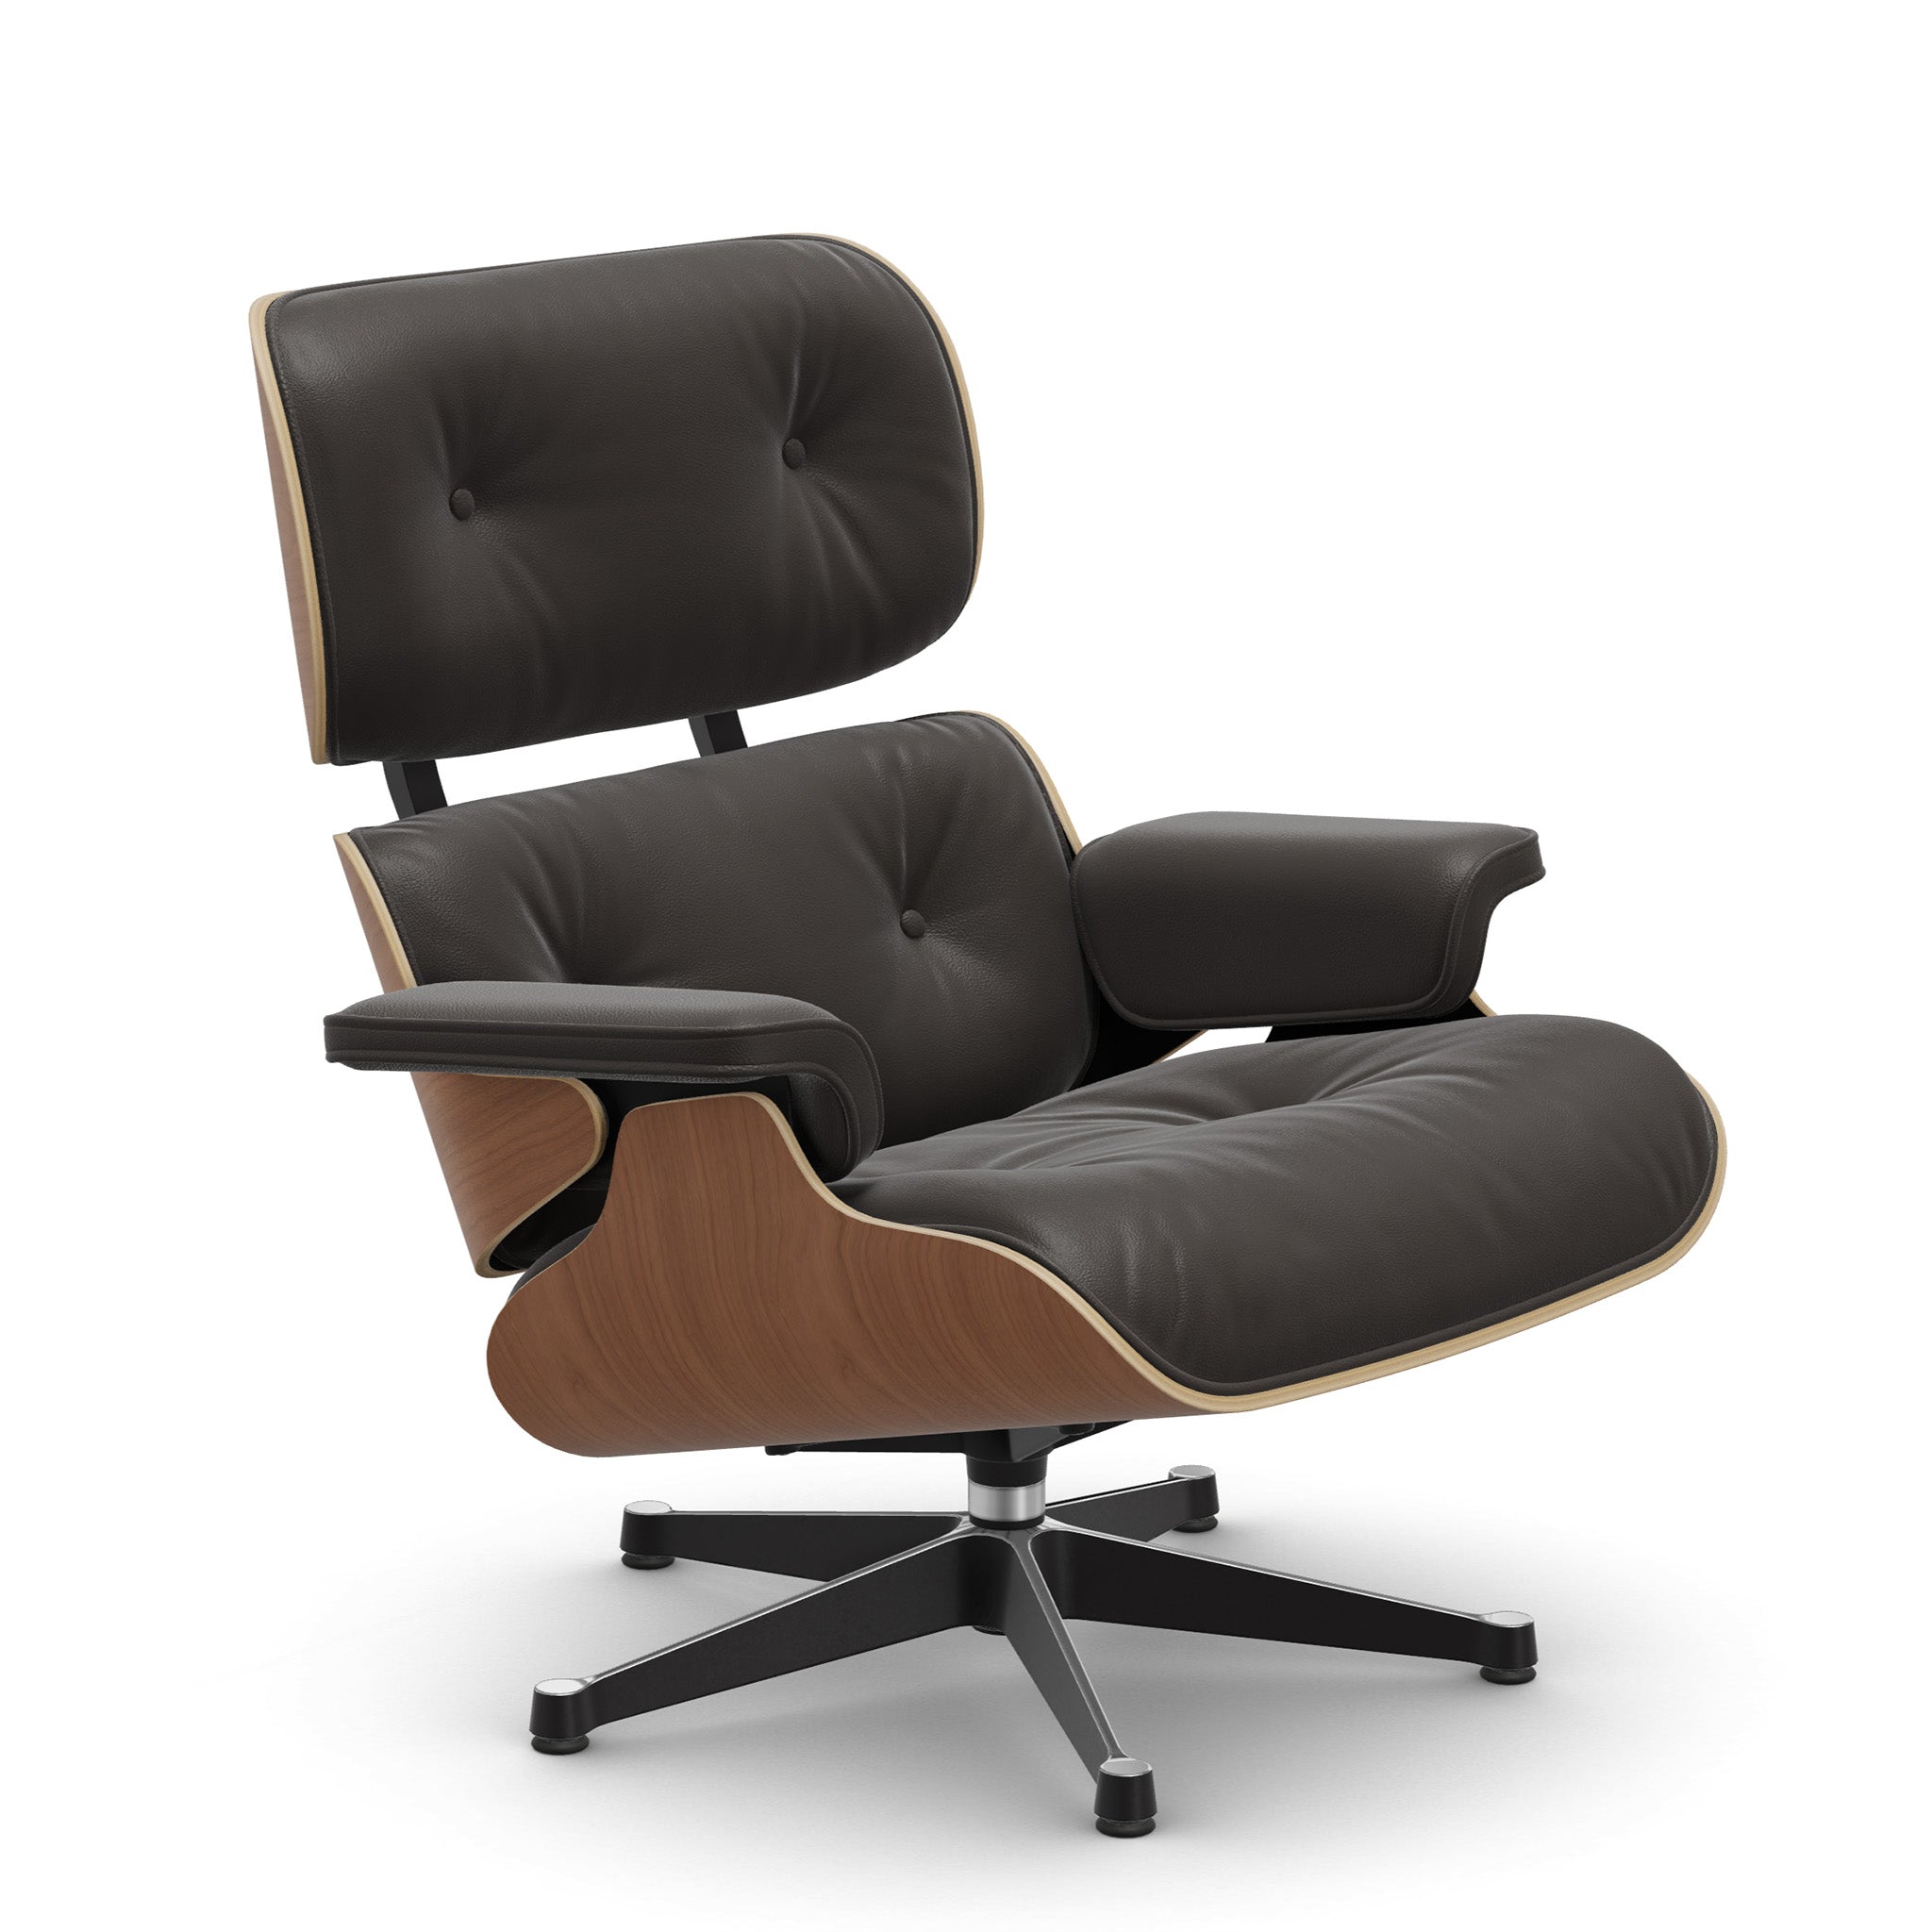 Eames Lounge Chair - Classic Dimensions by Vitra